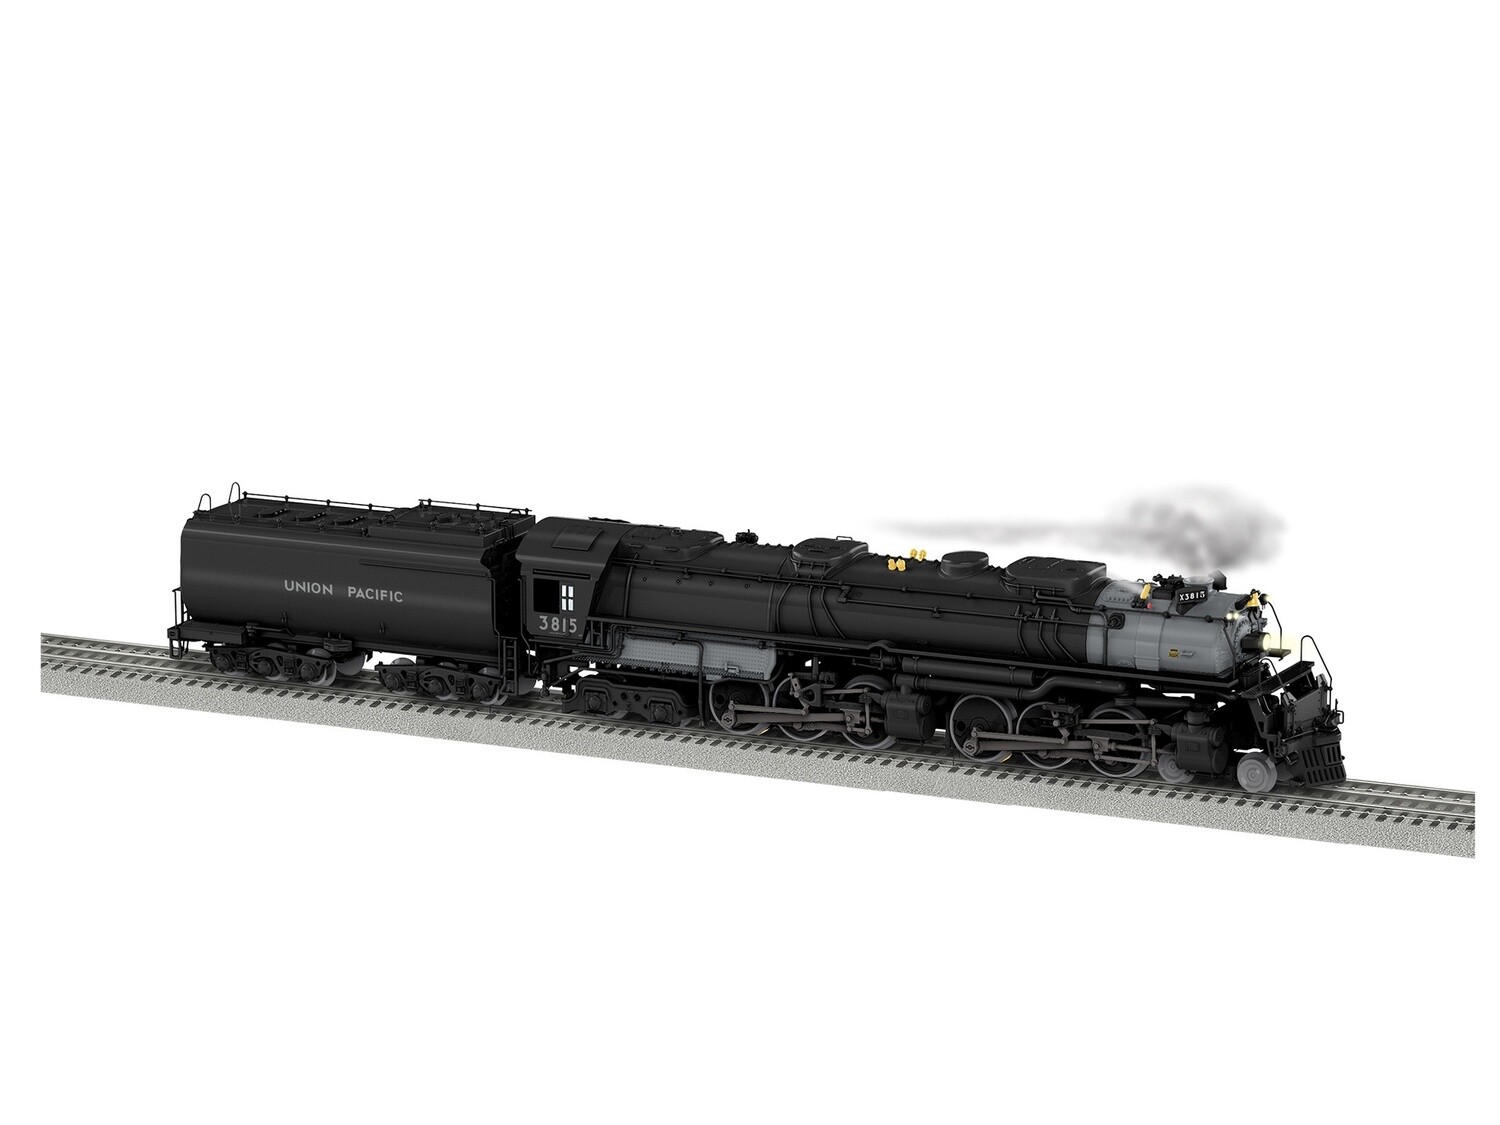 UNION PACIFIC LEGACY CHALLENGER #3815